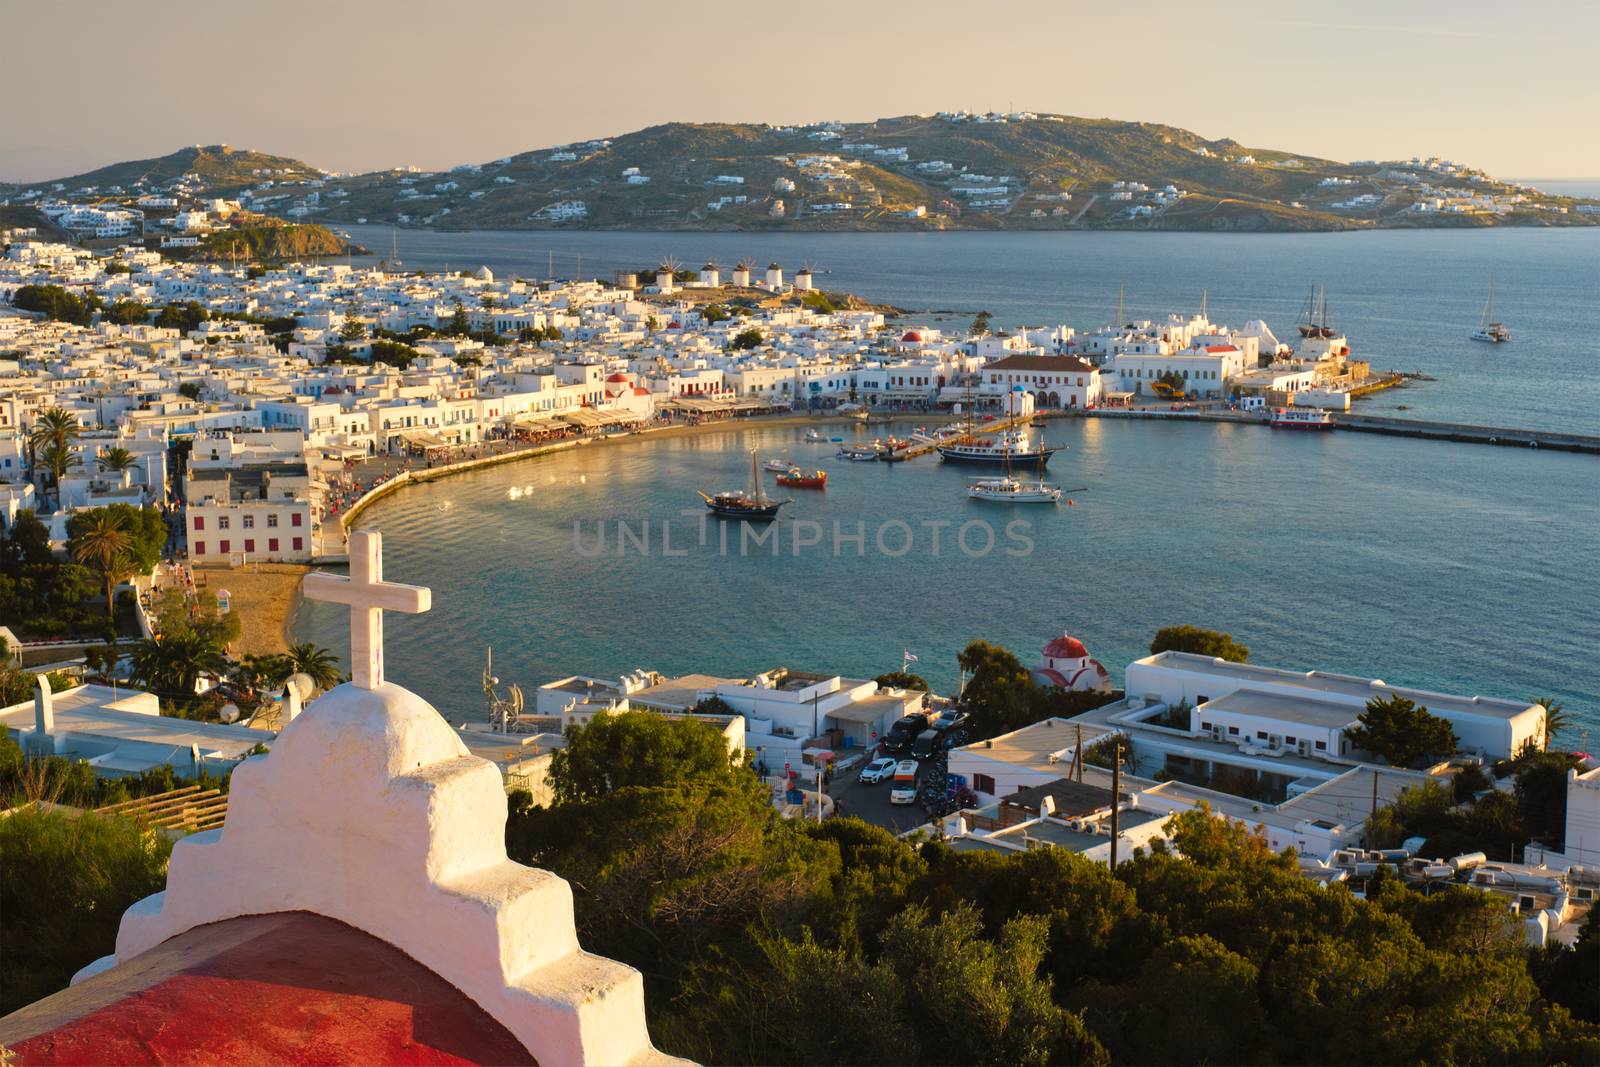 View of Mykonos town Greek tourist holiday vacation destination with famous windmills, and port with boats and yachts on sunset over St Basil church cross. Mykonos, Cyclades islands, Greece.